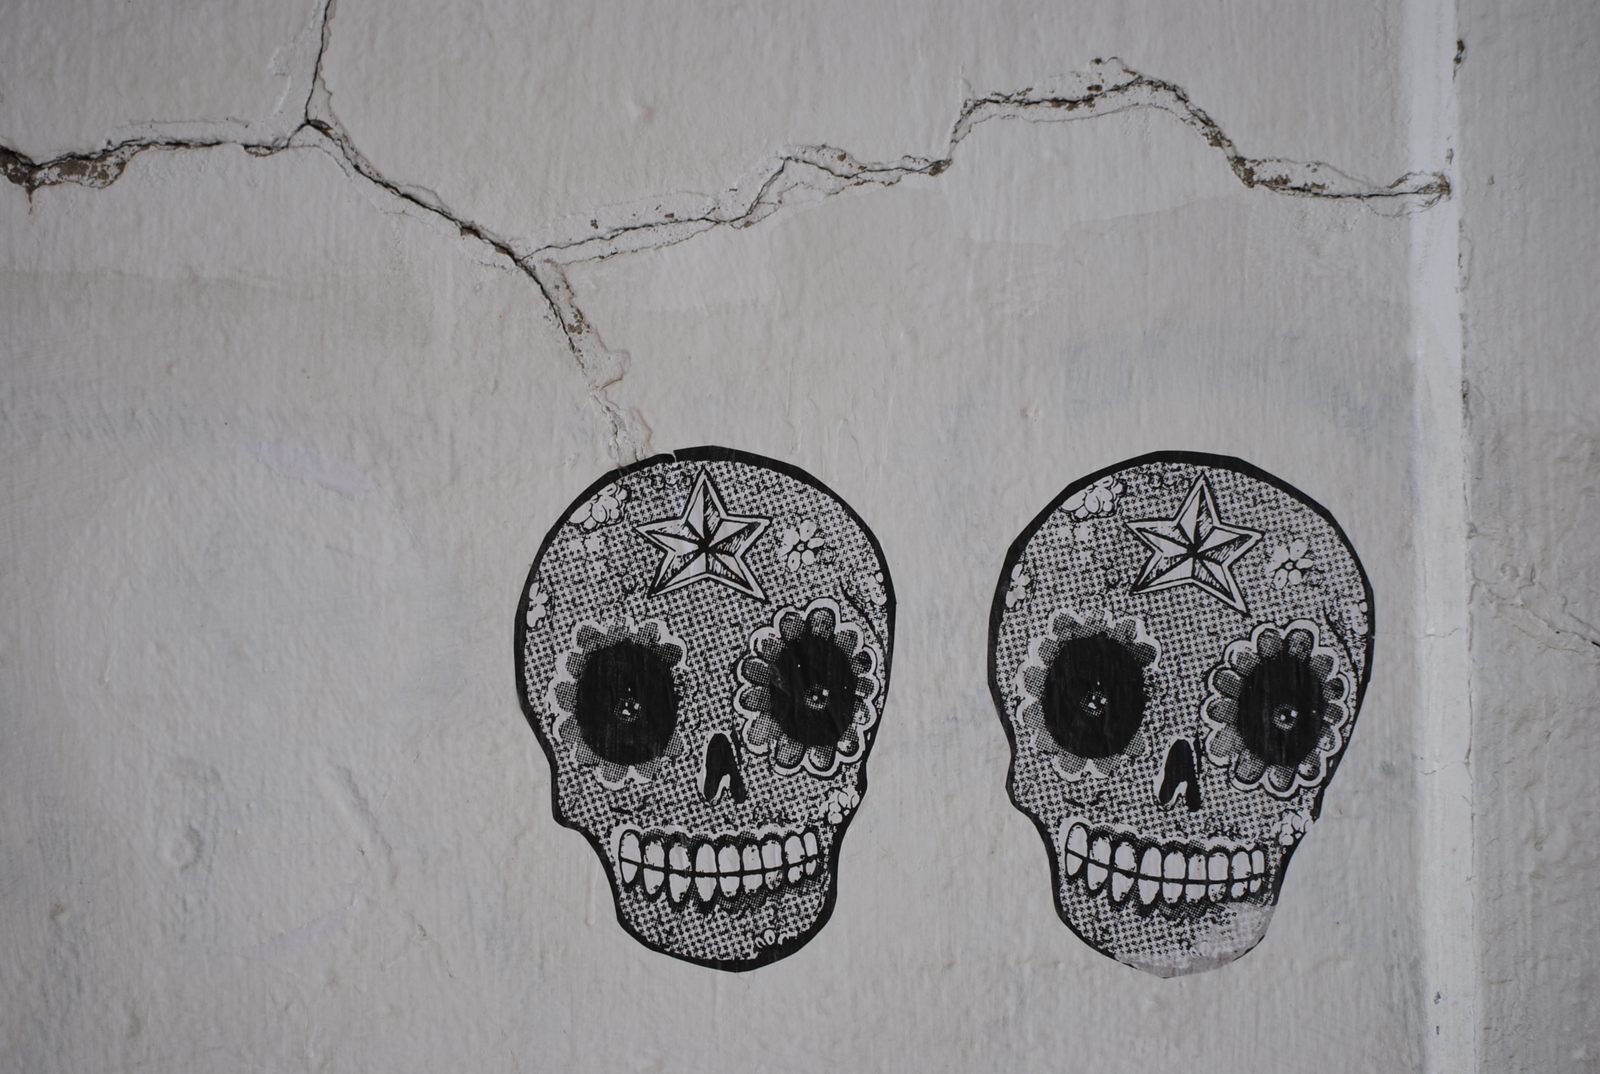 skulls painted on a wall with one facing the camera